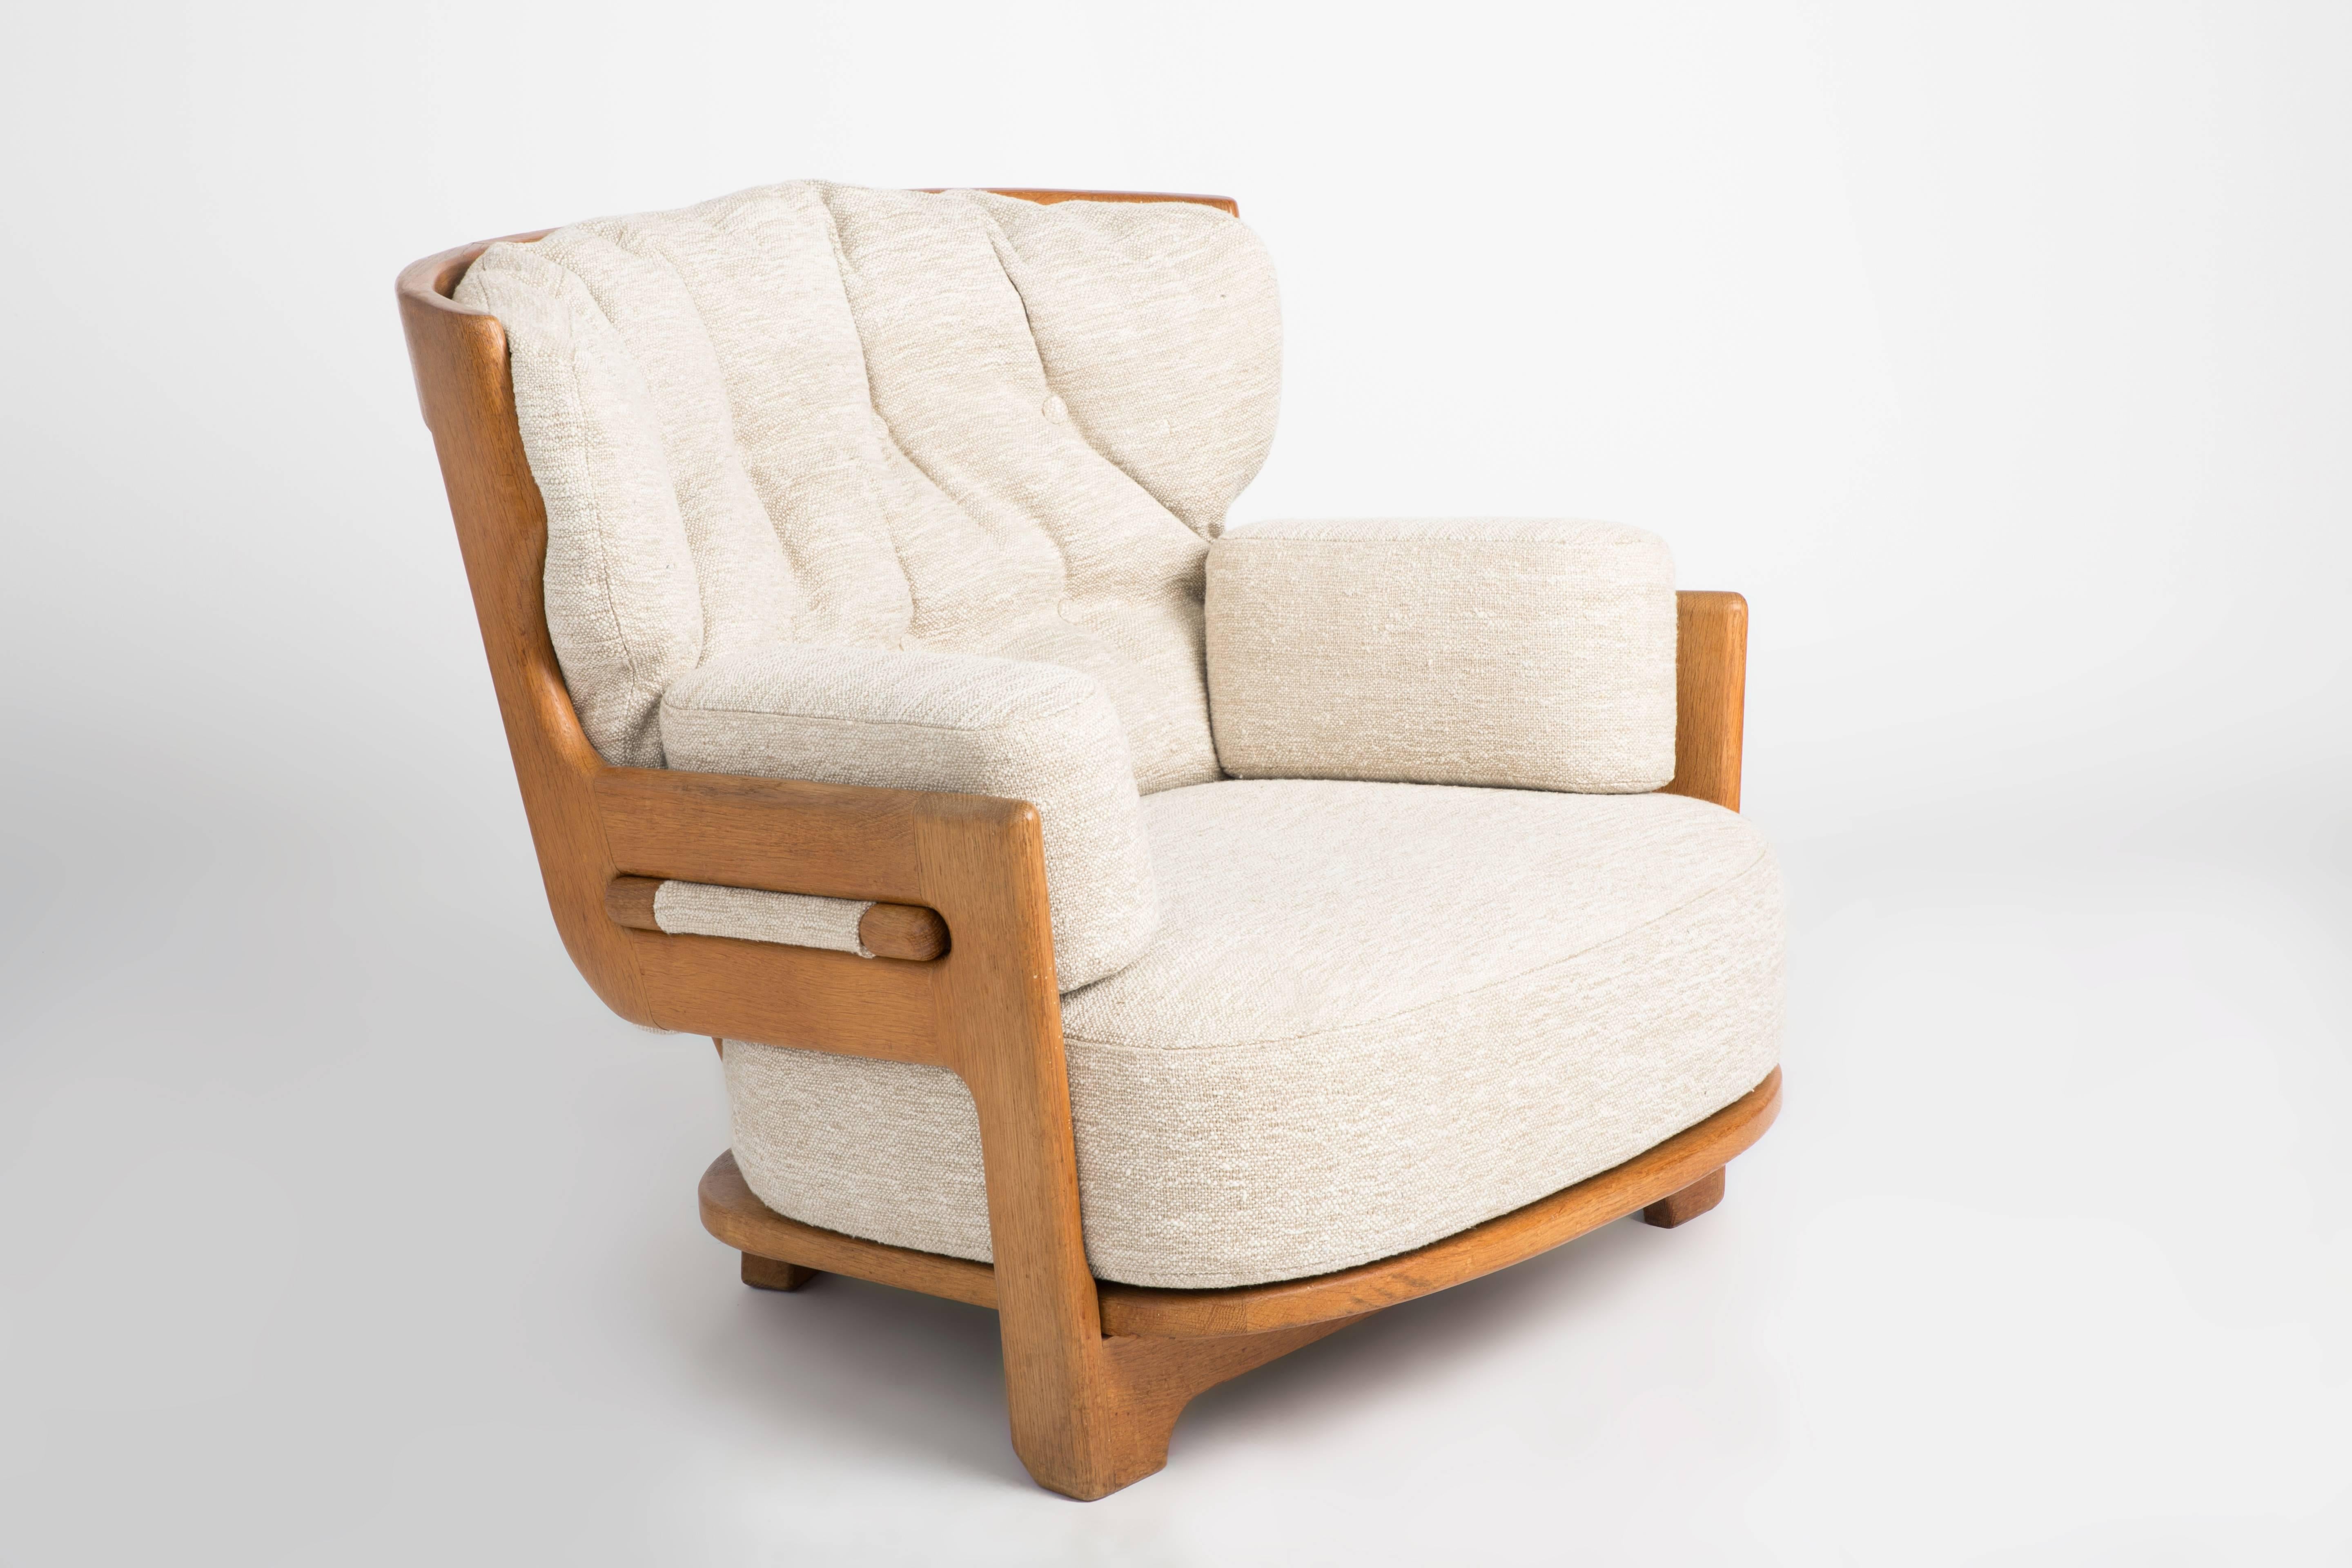 Single lounge chair, in oak and upholstery, by Guillerme et Chambron, France, 1960s. Excellent condition. Great patina.

Extraordinary chair by Guillerme and Chambron, in solid oak with the typical characteristic decorative details at the back and